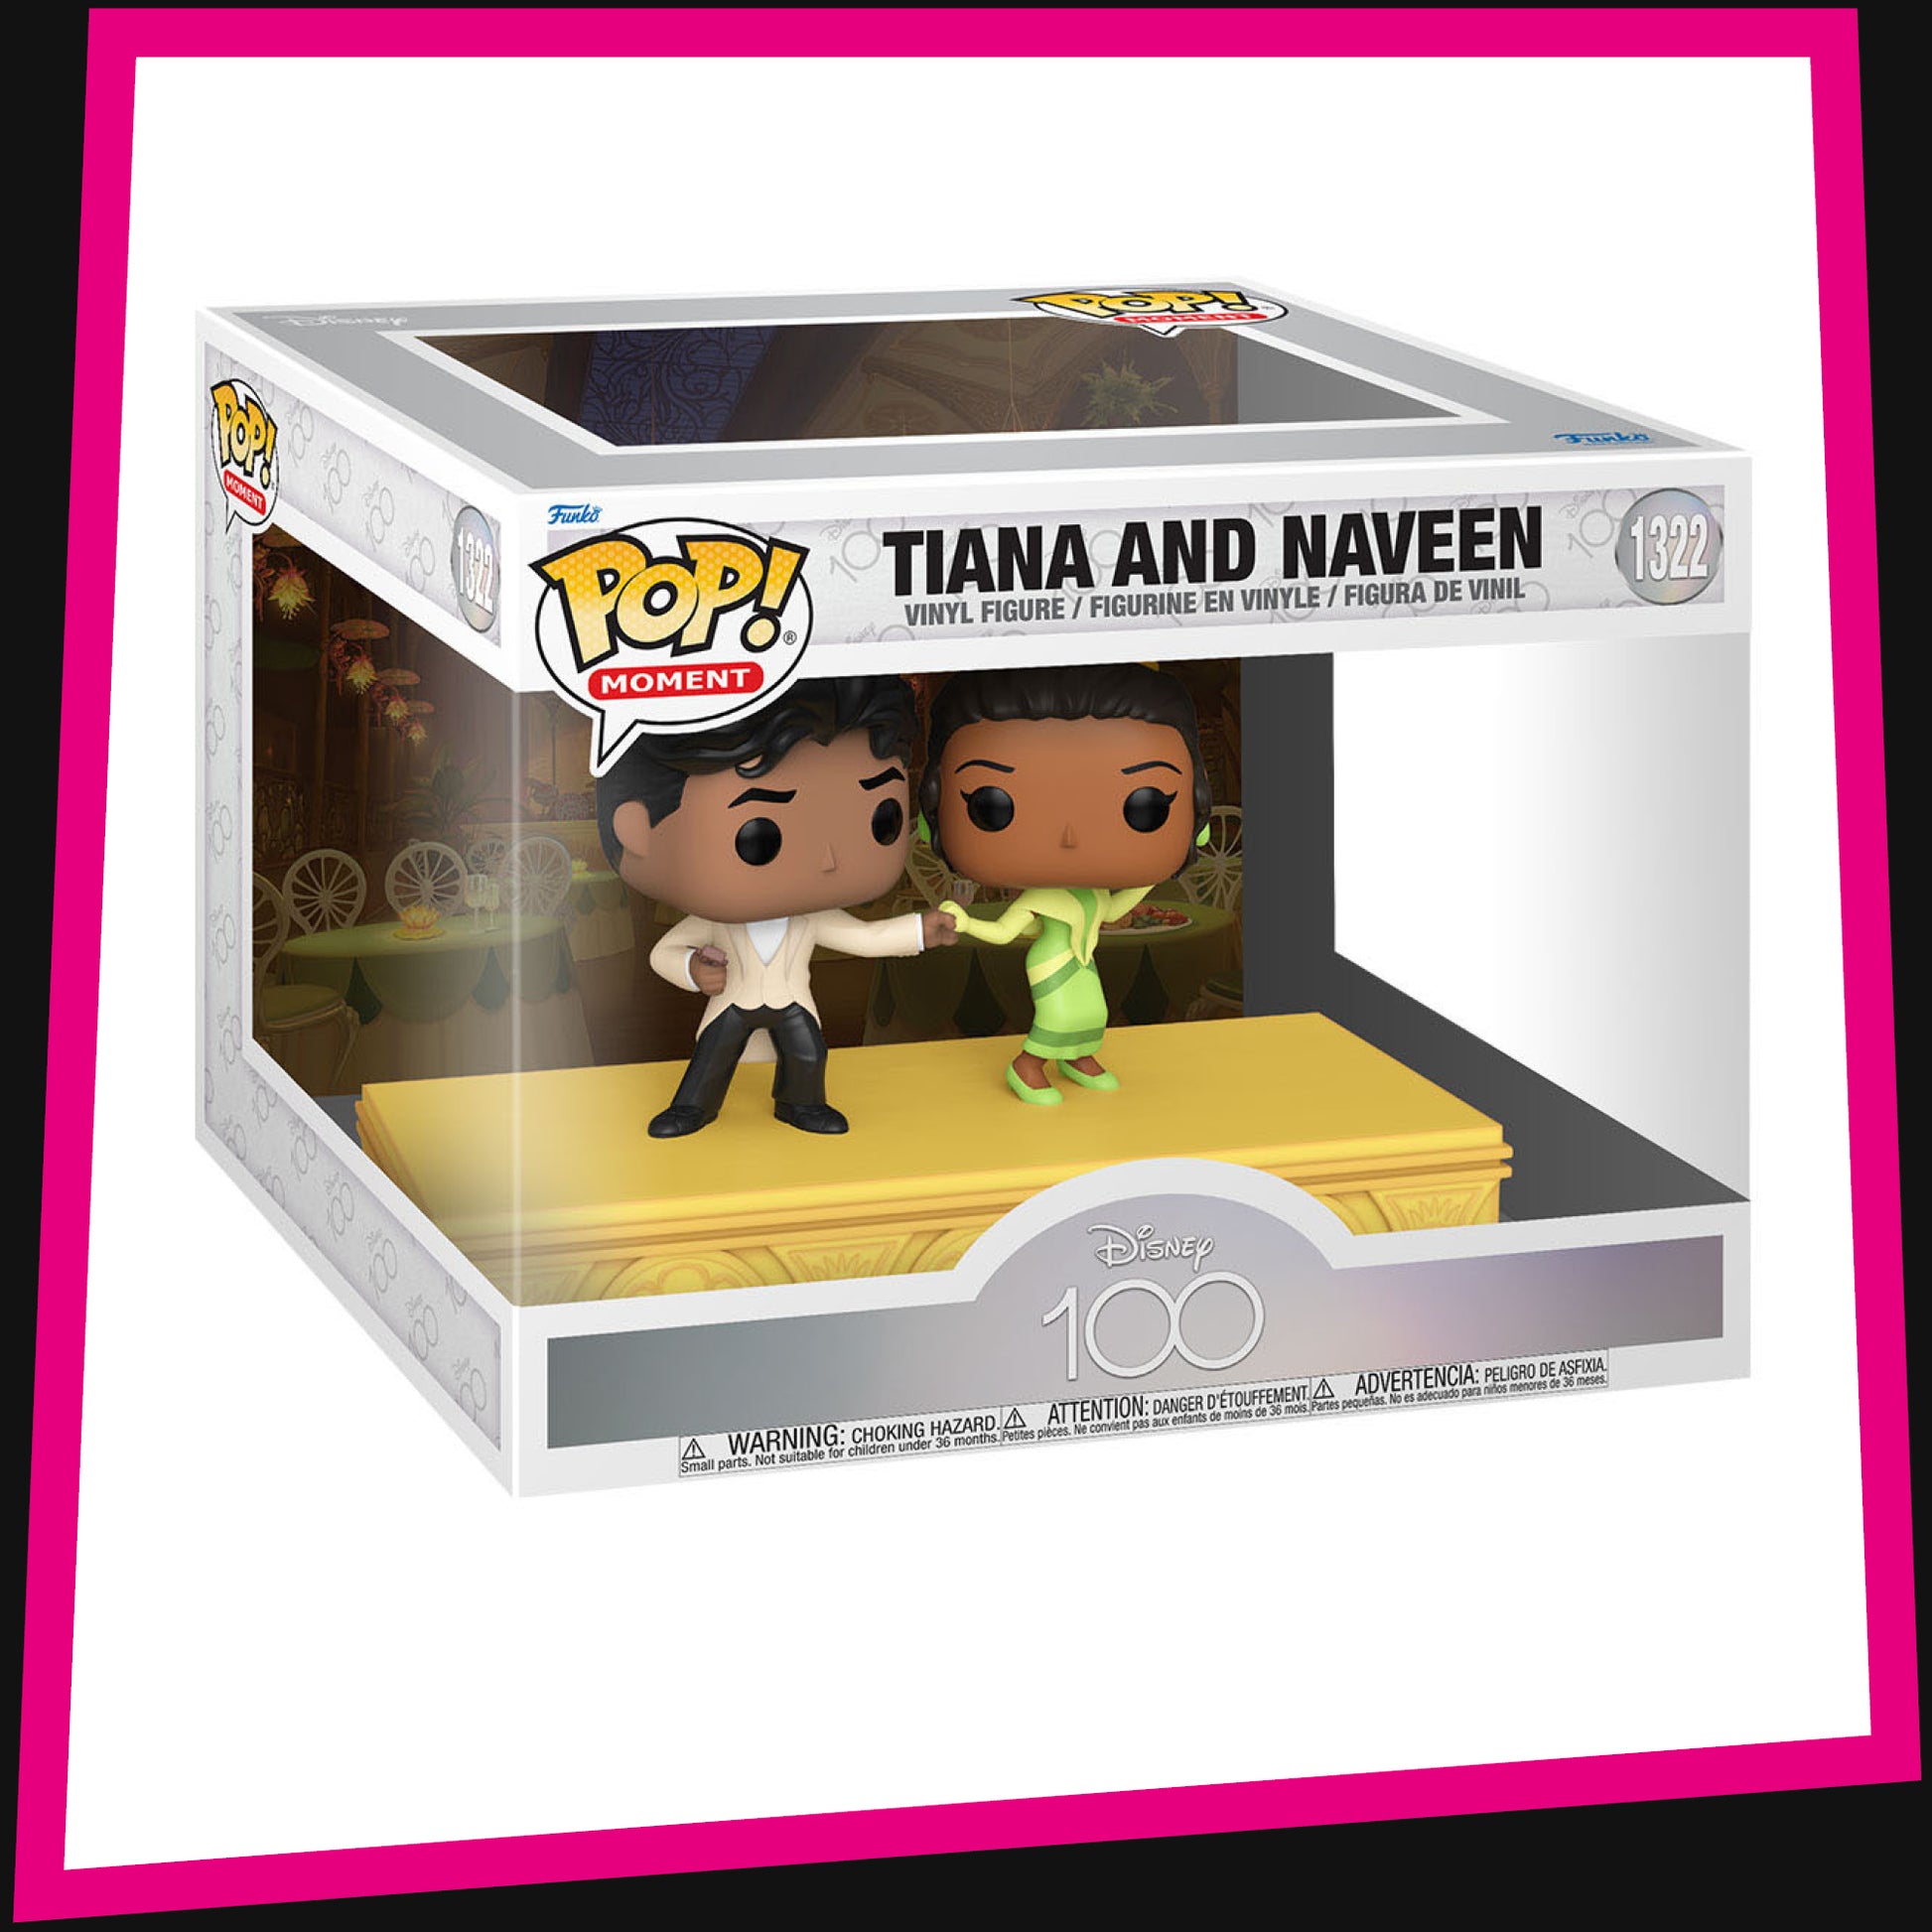 Tiana and Naveen - Vinyl Toy and – Funko #1322 Anniversary Disney Barn & 100 Momen Derek\'s Collectibles POP! New - Toys Pre-Owned